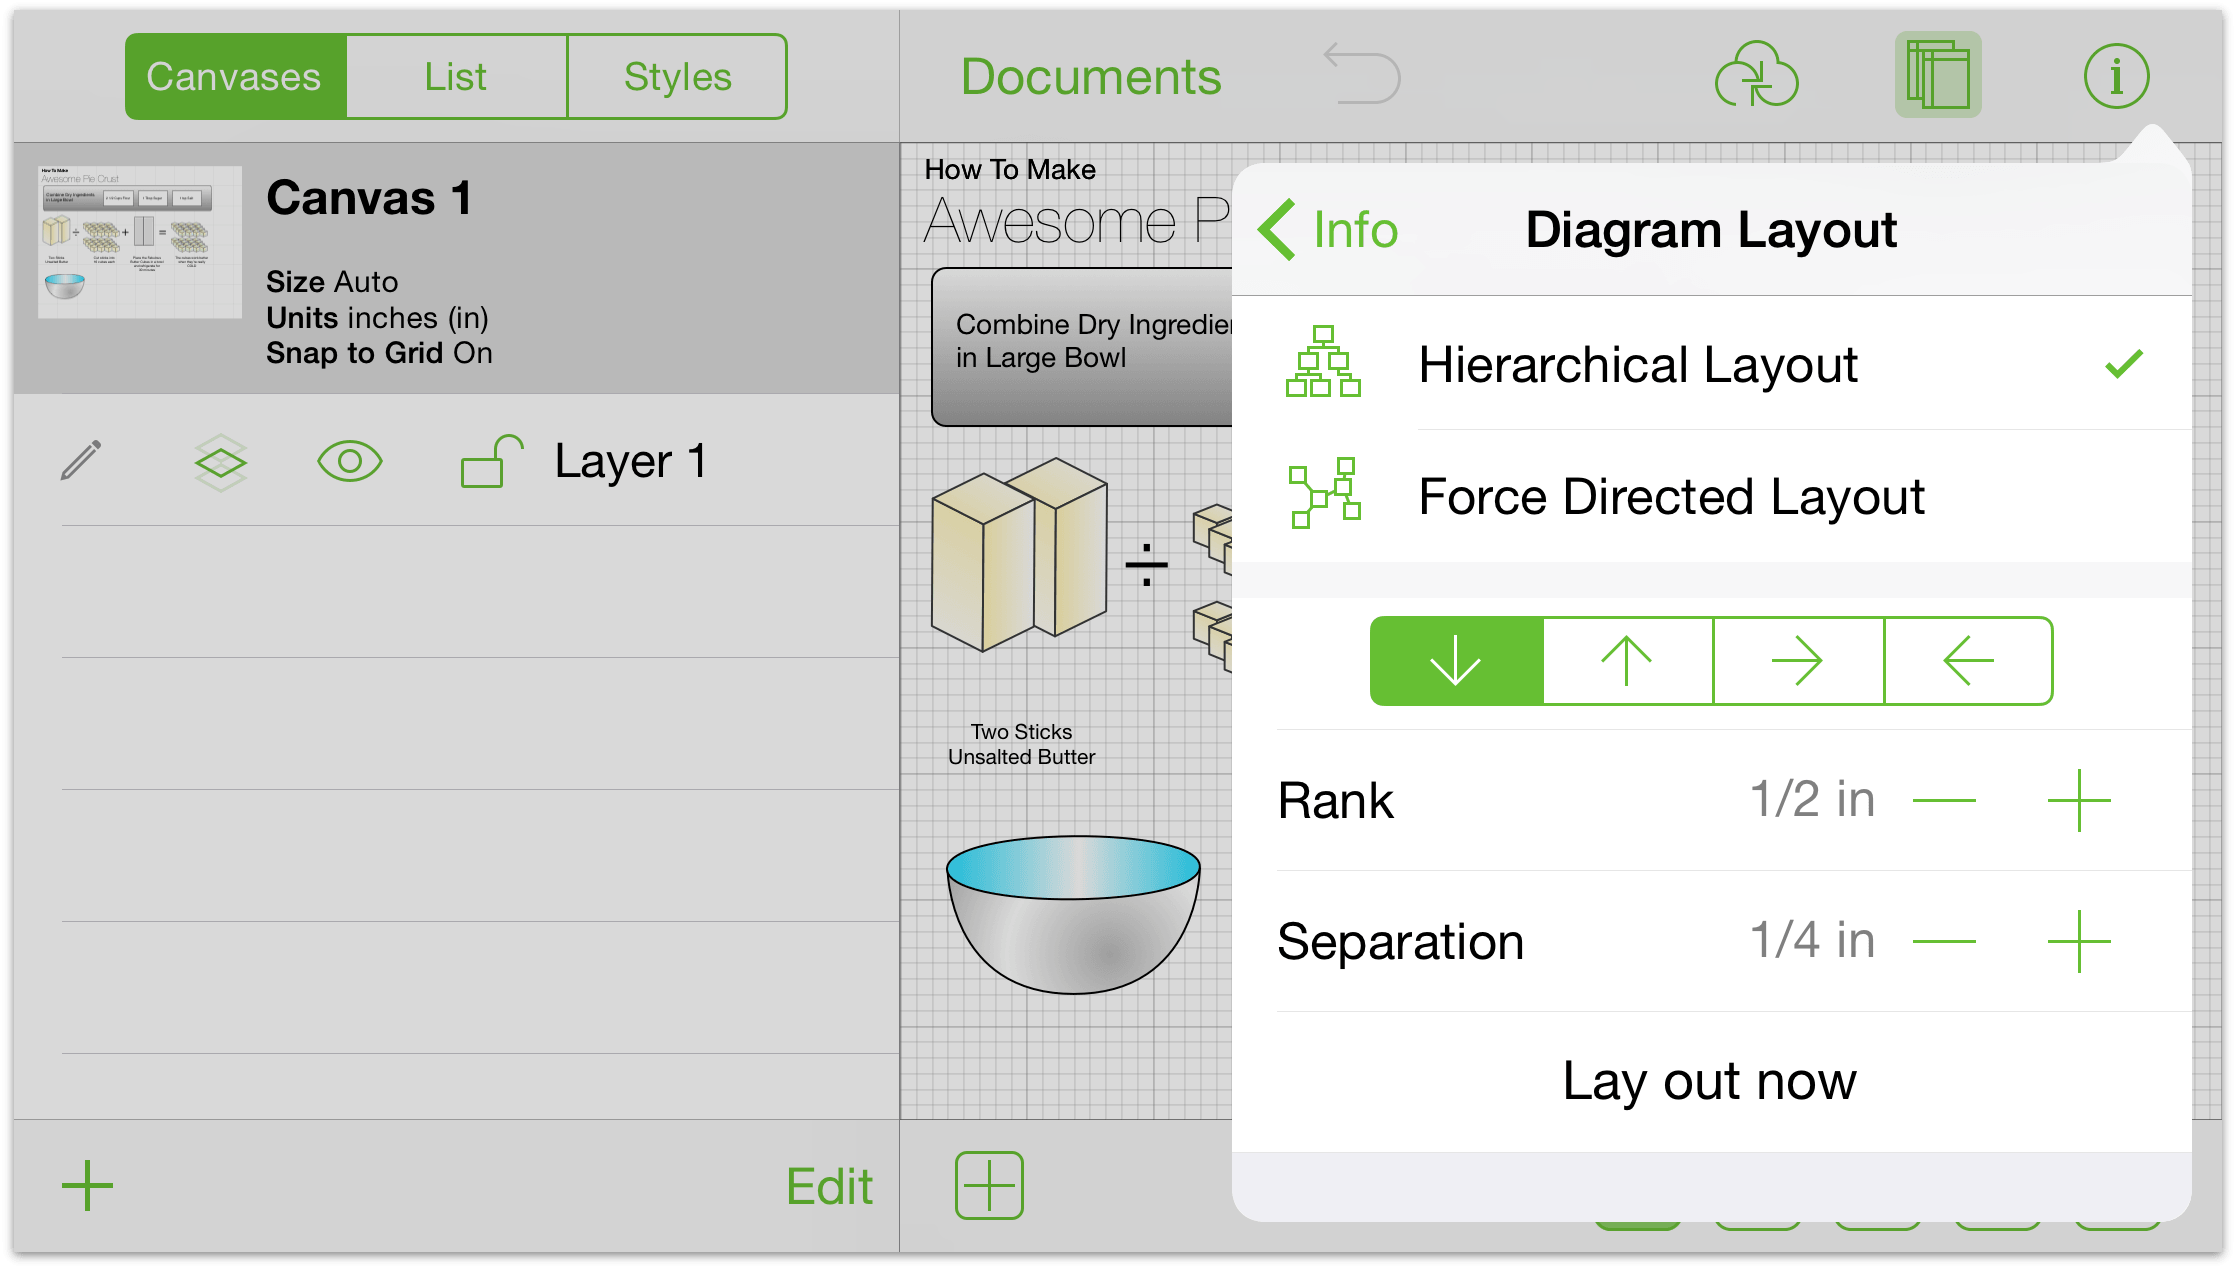 Diagram layout options